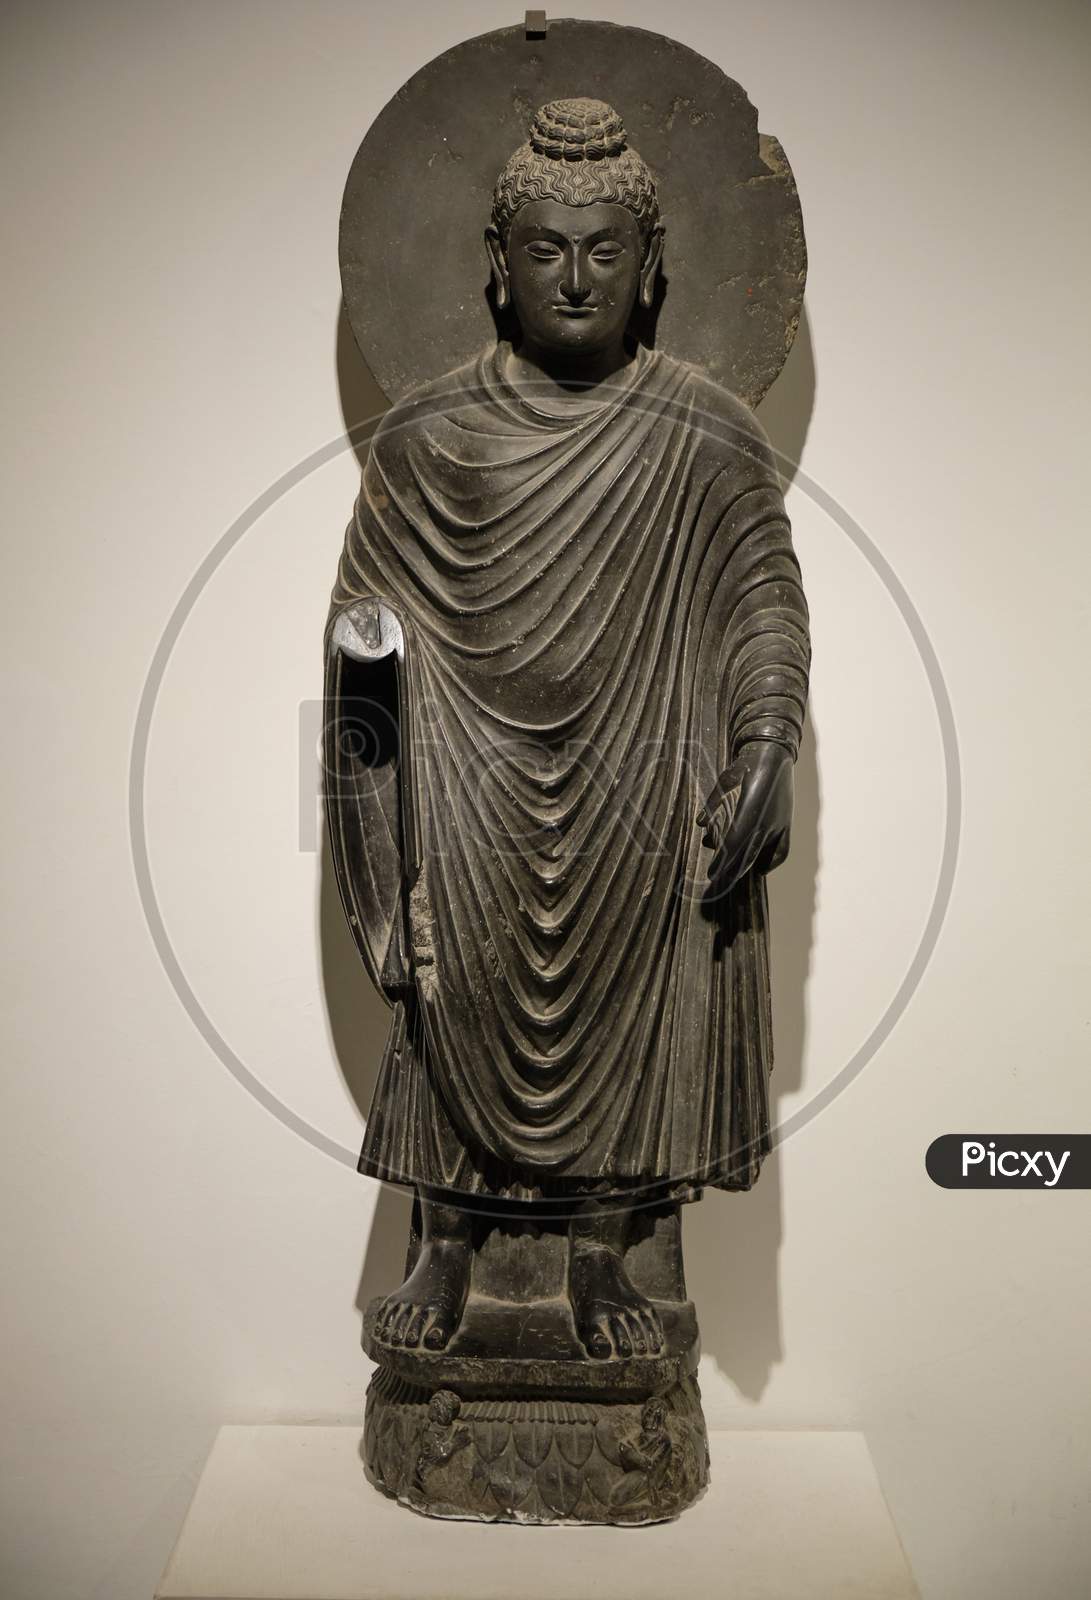 2Nd Century Greco-Buddhist Statue Of Standing Buddha From Gandhara, In The National Museum Of India In New Delhi